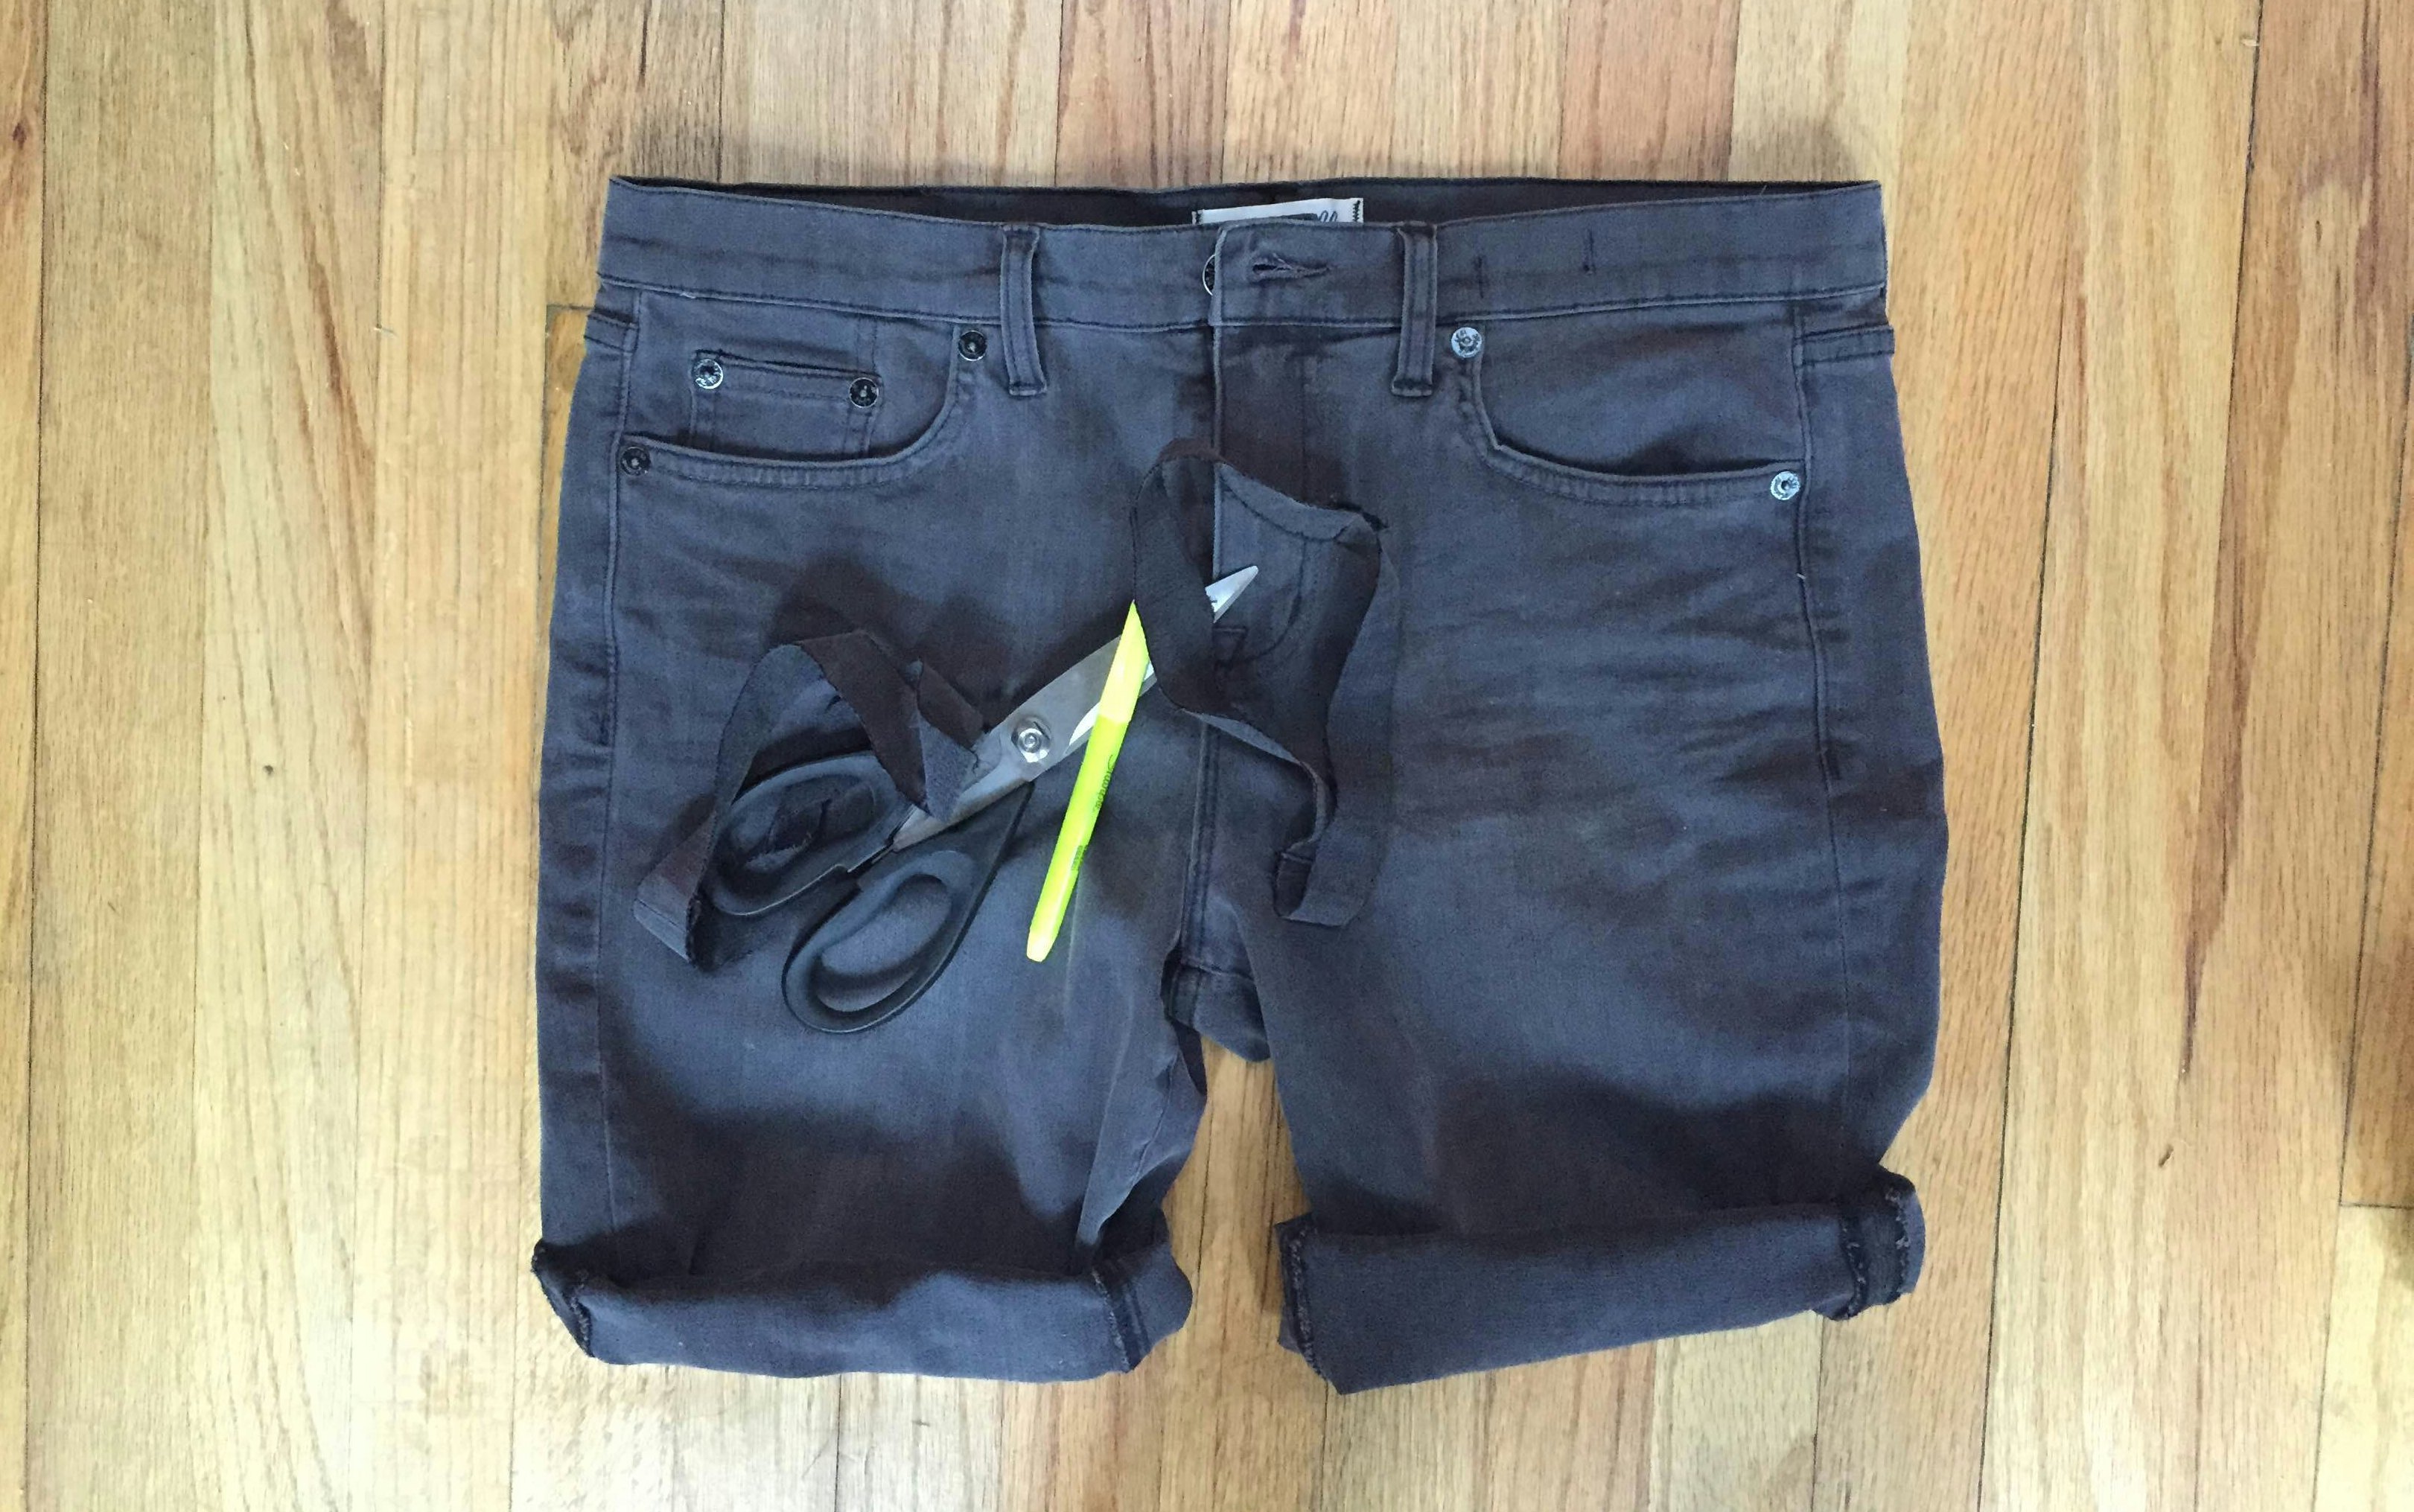 cutting levis into shorts